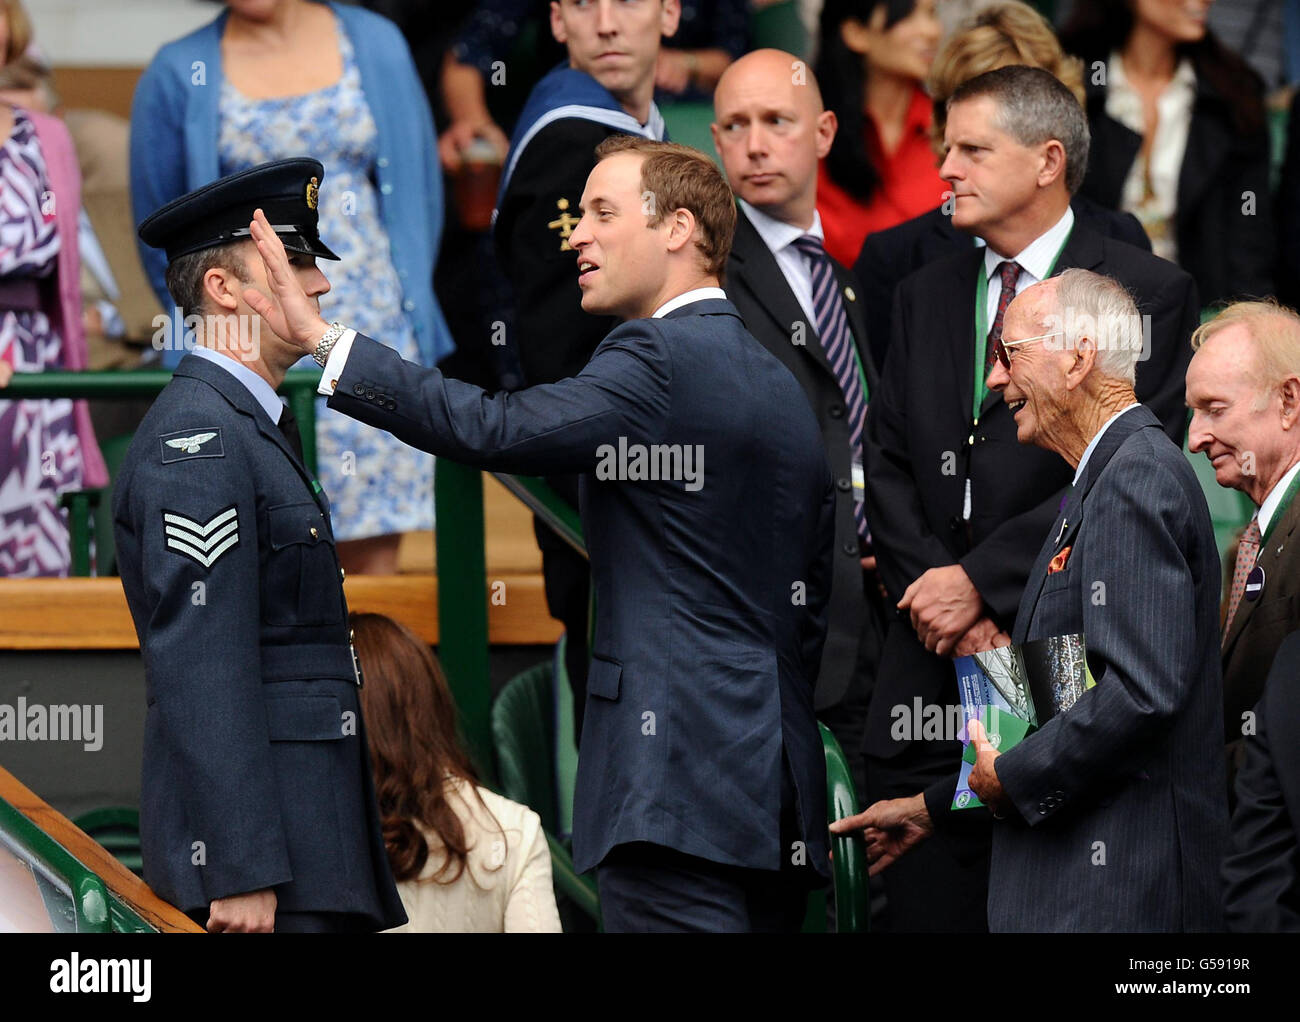 The Duke of Cambridge waves to the crowd during a break for rain on day nine of the 2012 Wimbledon Championships at the All England Lawn Tennis Club, Wimbledon. Stock Photo